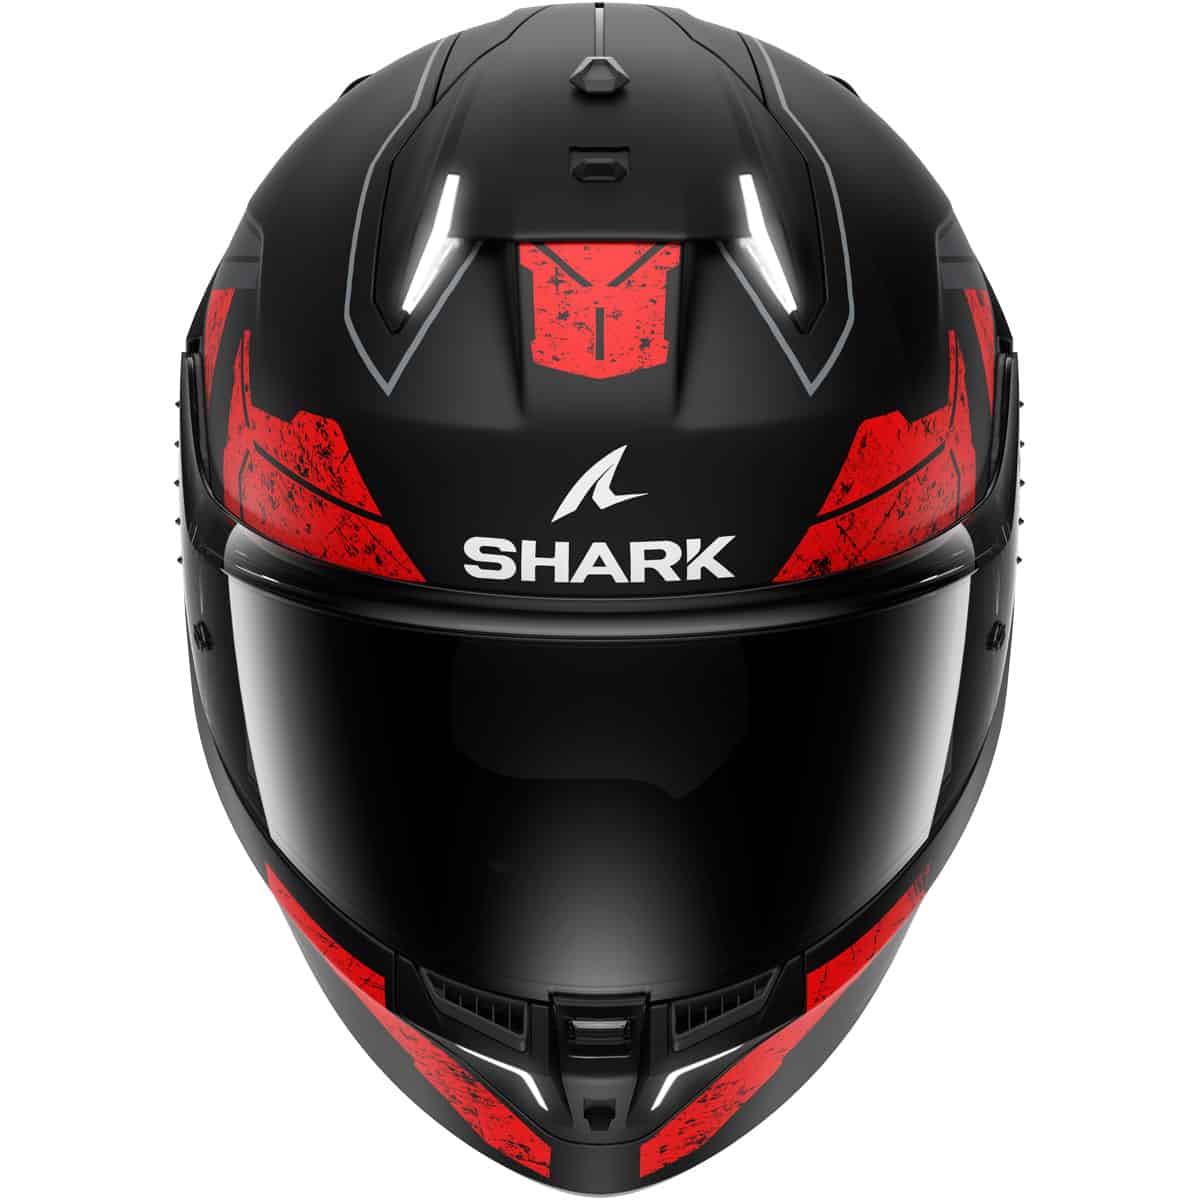 The Shark Skwal i3 helmet is the world's 1st helmet with integrated brake lights. This groundbreaking helmet blends LED lights with an accelerometer to flash brake signals from the rear as you slow down—all without any cables or Bluetooth connections  2